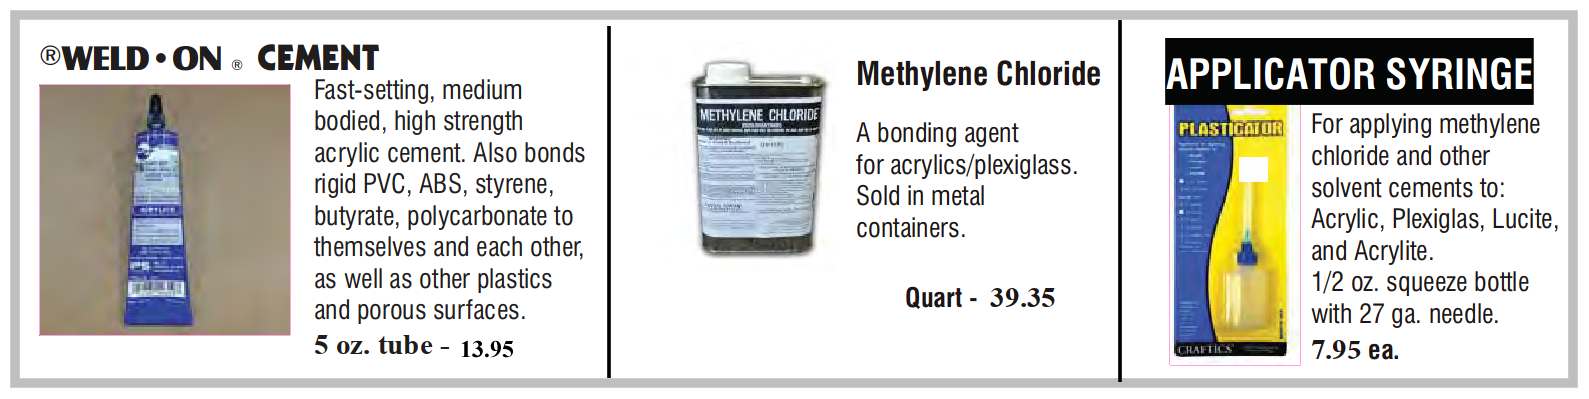 adhesives 1 aug 2022 - Adhesives - Spray, Cement, Tape